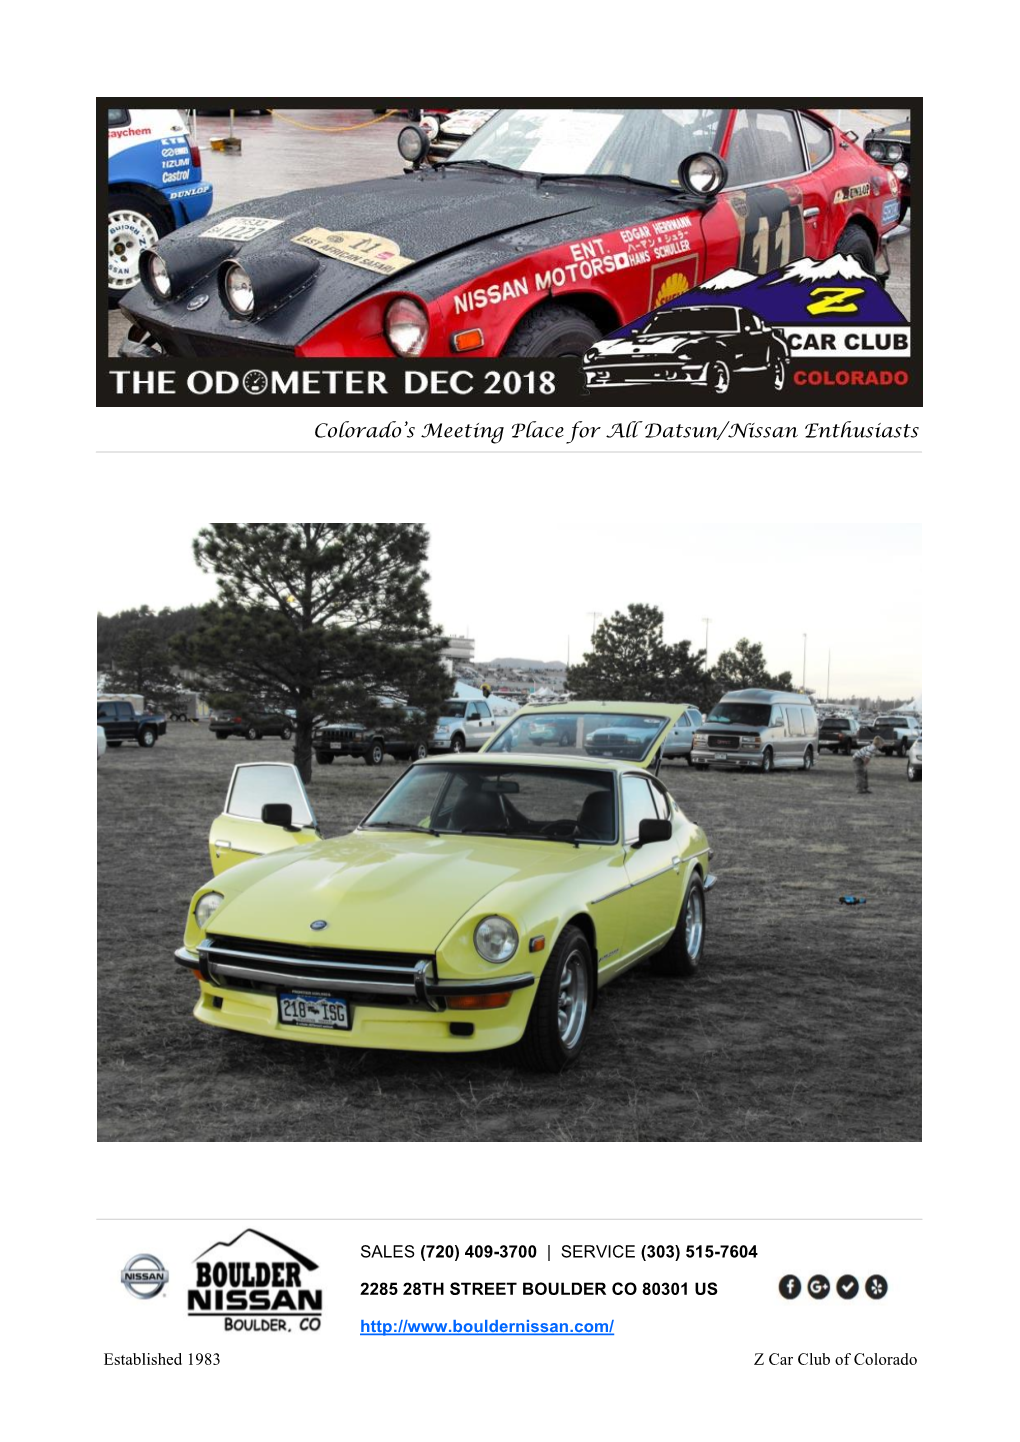 Colorado's Meeting Place for All Datsun/Nissan Enthusiasts